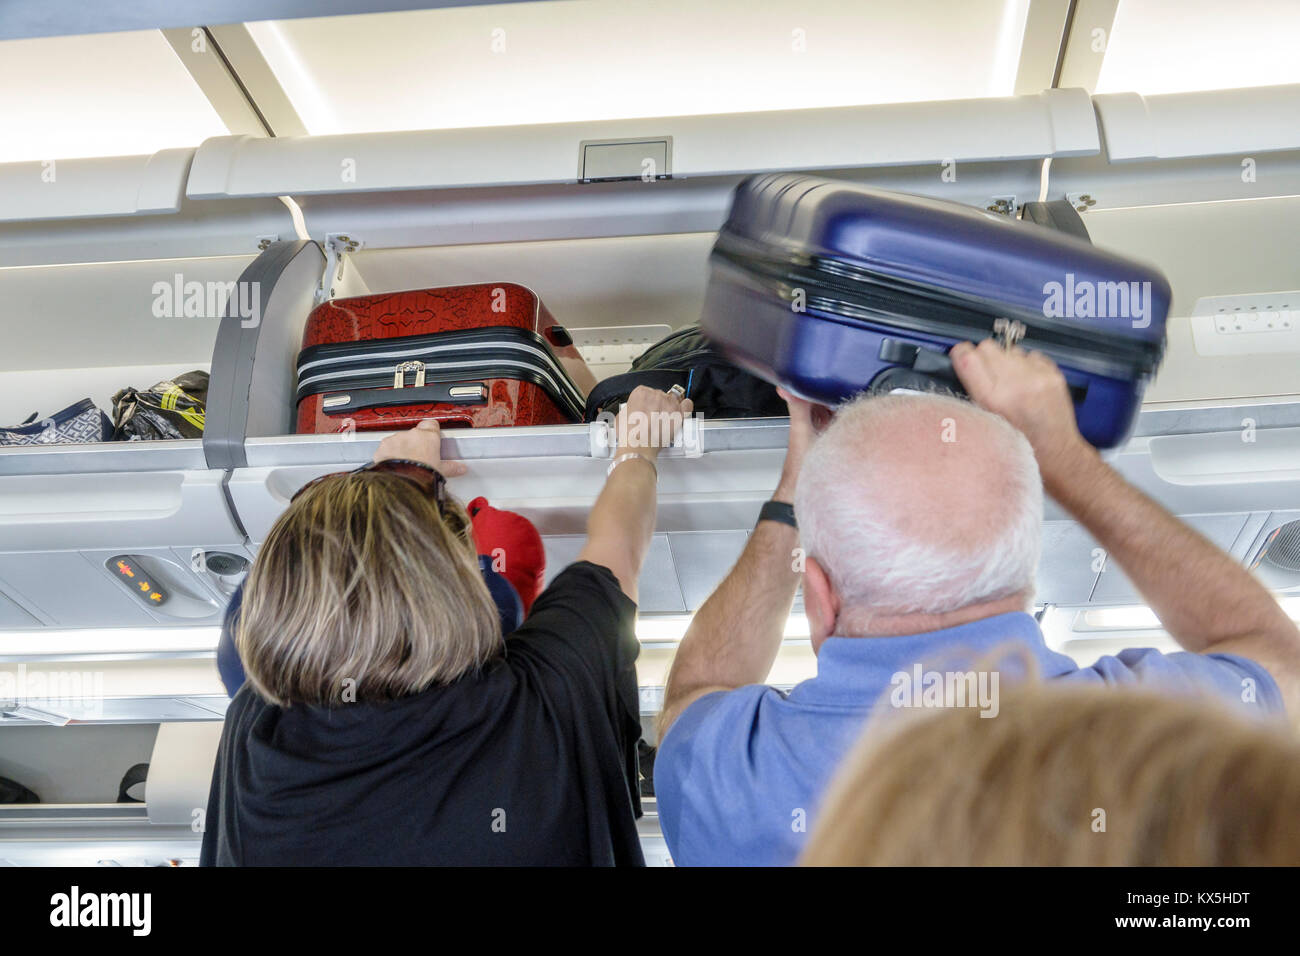 Hand Baggage Allowed On The Aircraft TAP Air Portugal | clinicadamama.com.br